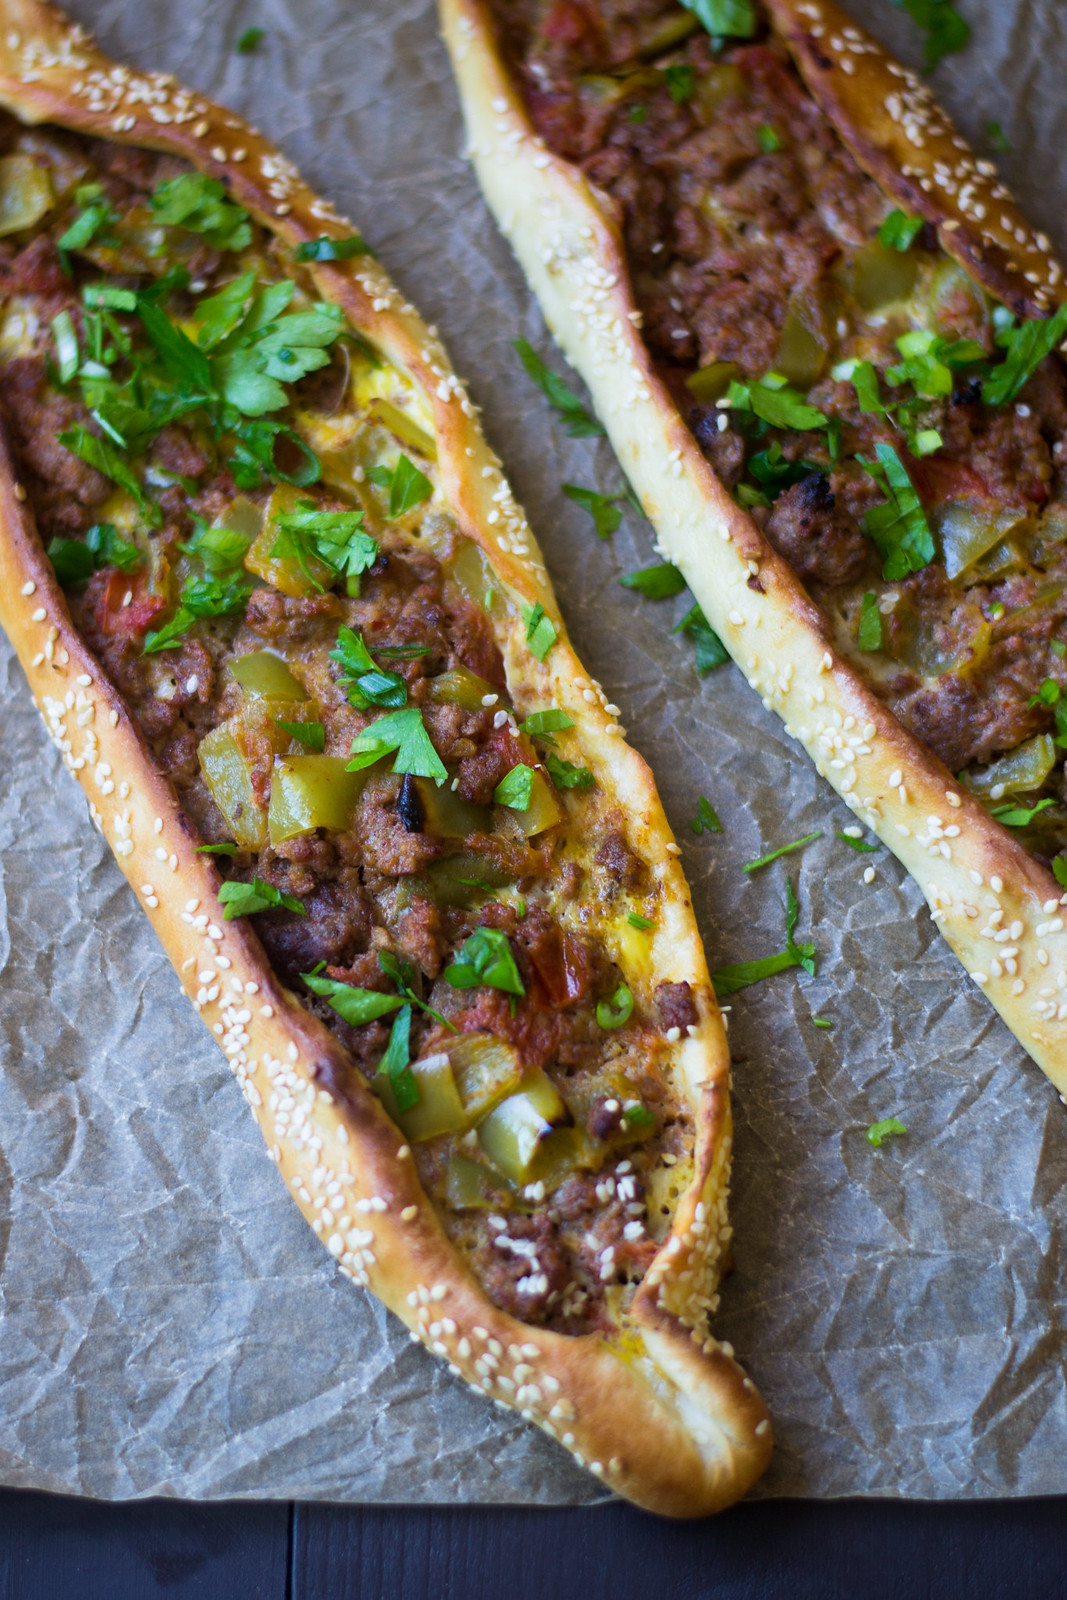 Turkish Pide (aka pizza) is a Turkish comfort food favorite! Here are 2 different fillings, one with meat and peppers and the other with cheese and egg.